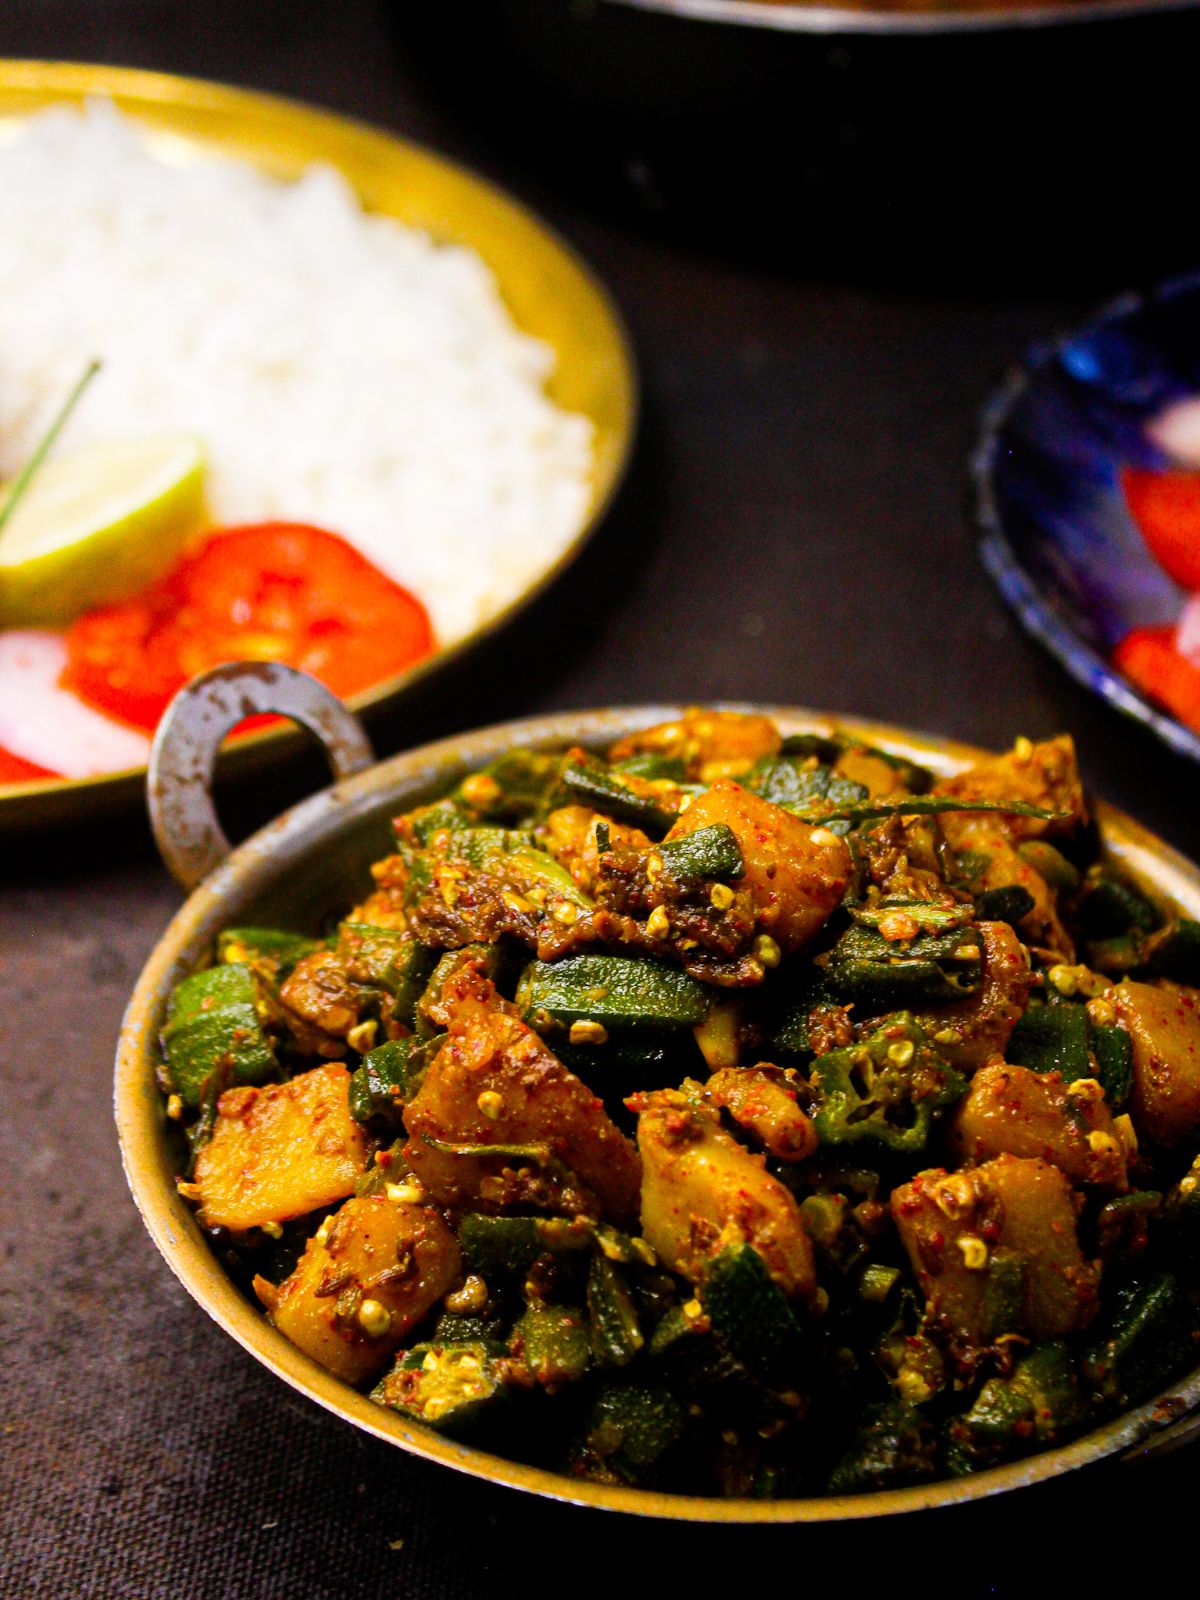 Hot aloo bhindi served in a plate to enjoy